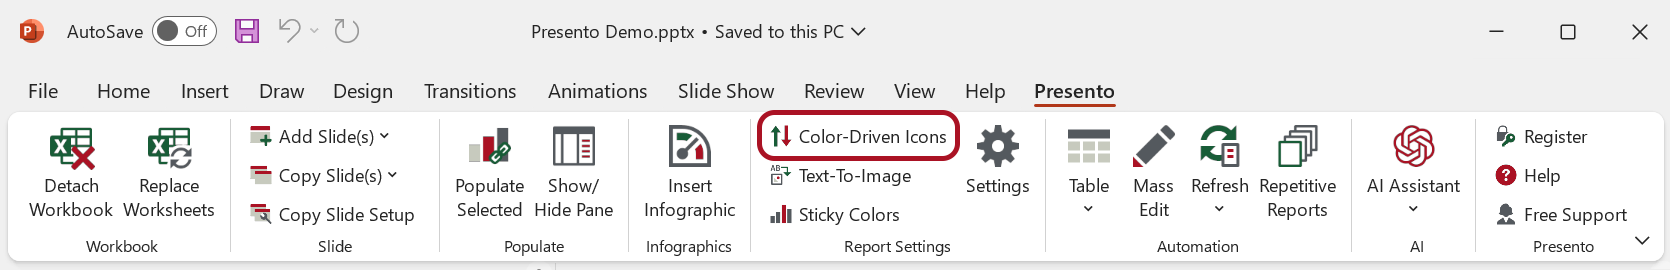 Color Driven Icons in the Presento Ribbon Tab